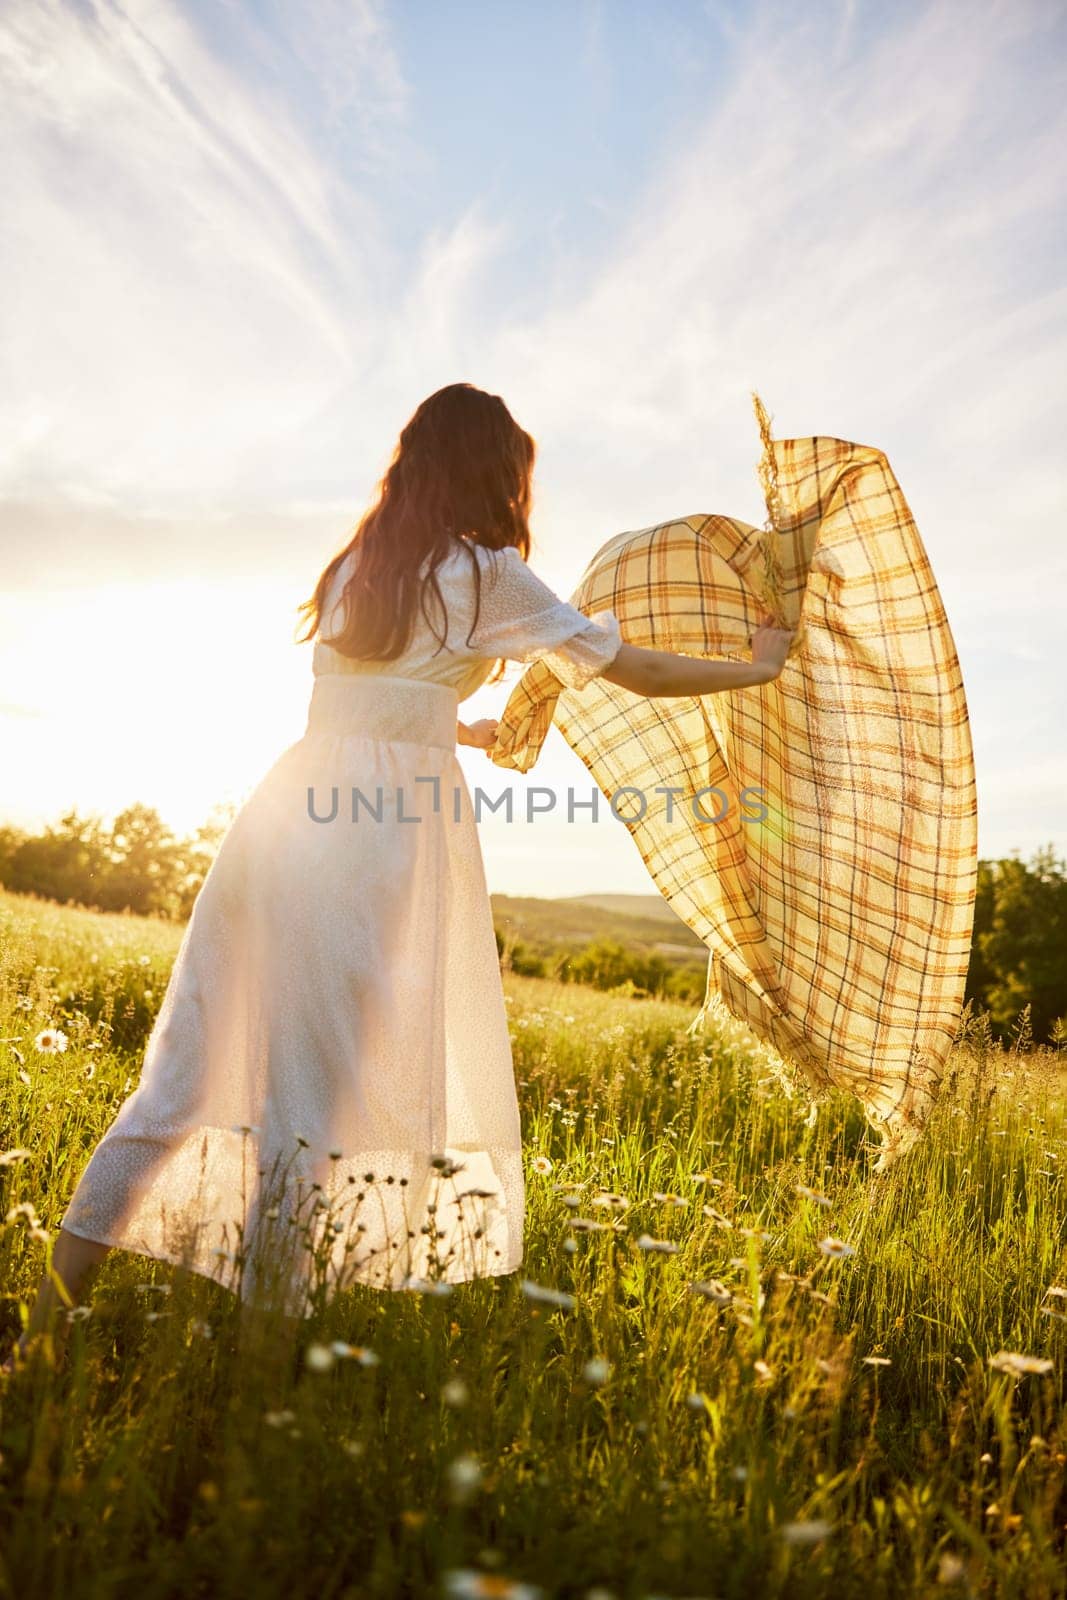 a woman in a light dress in nature spreads a plaid. Sunset, summer by Vichizh